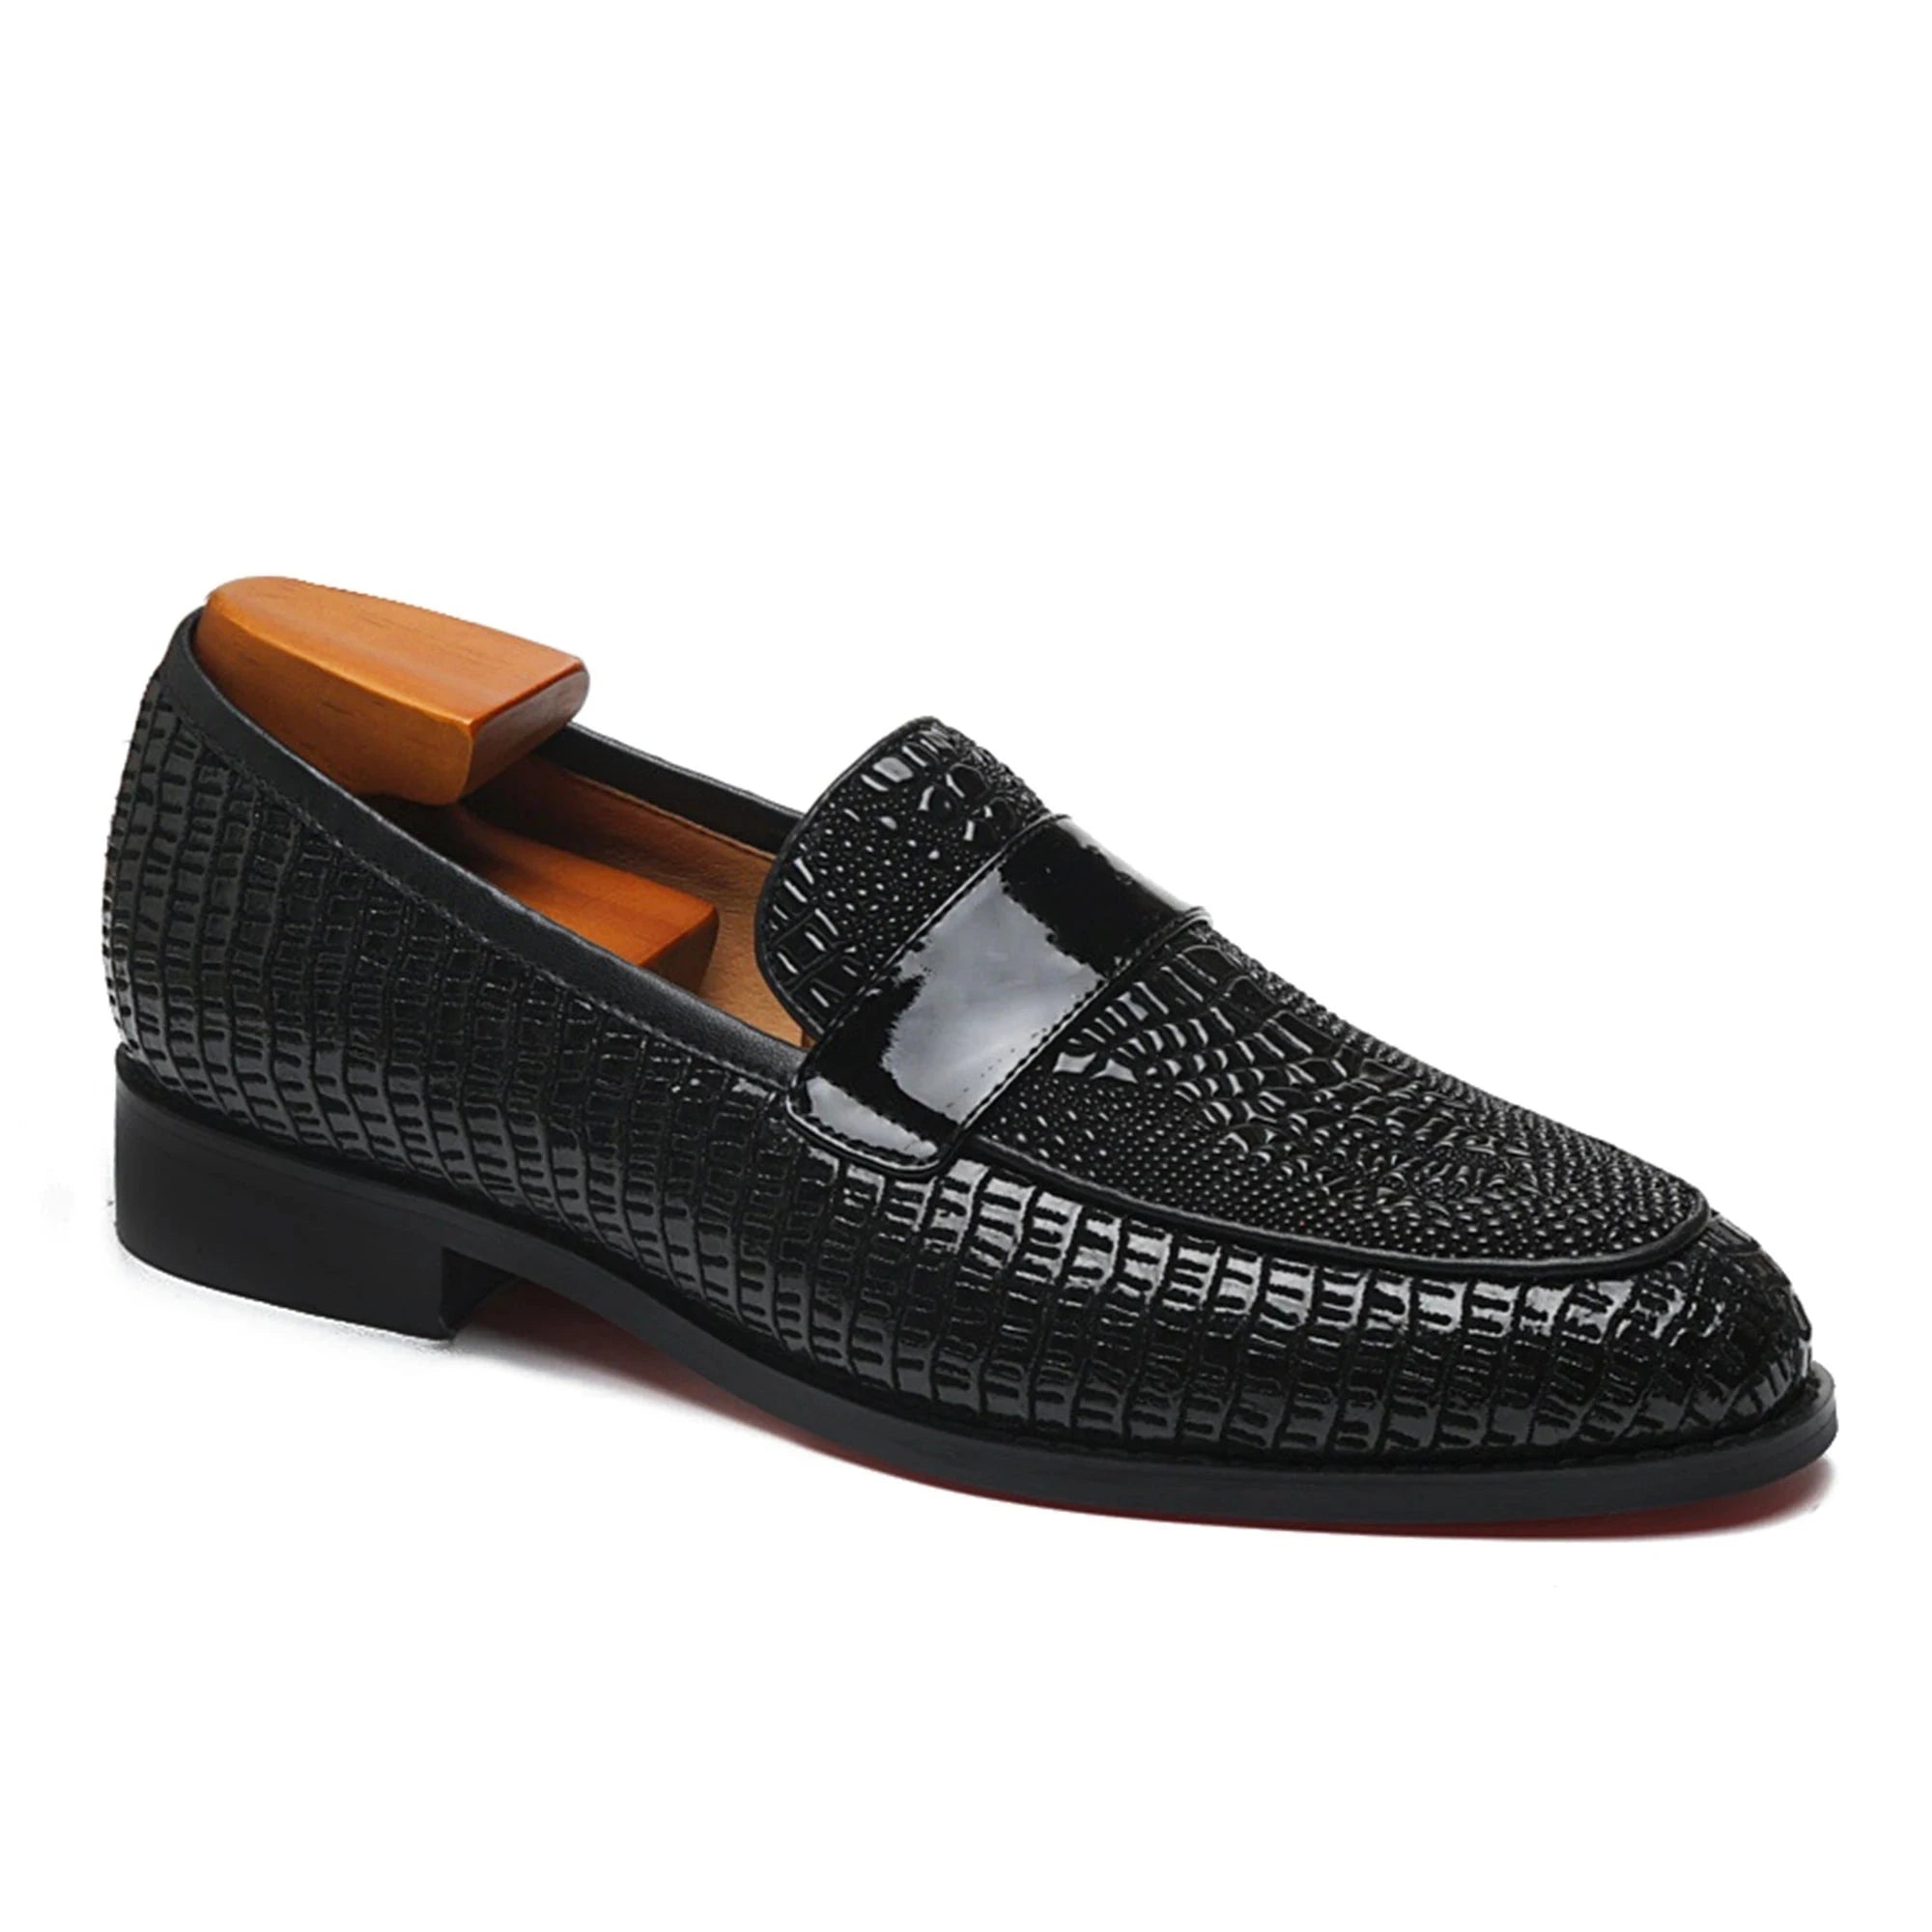 luxury leather loafers for men - red bottom